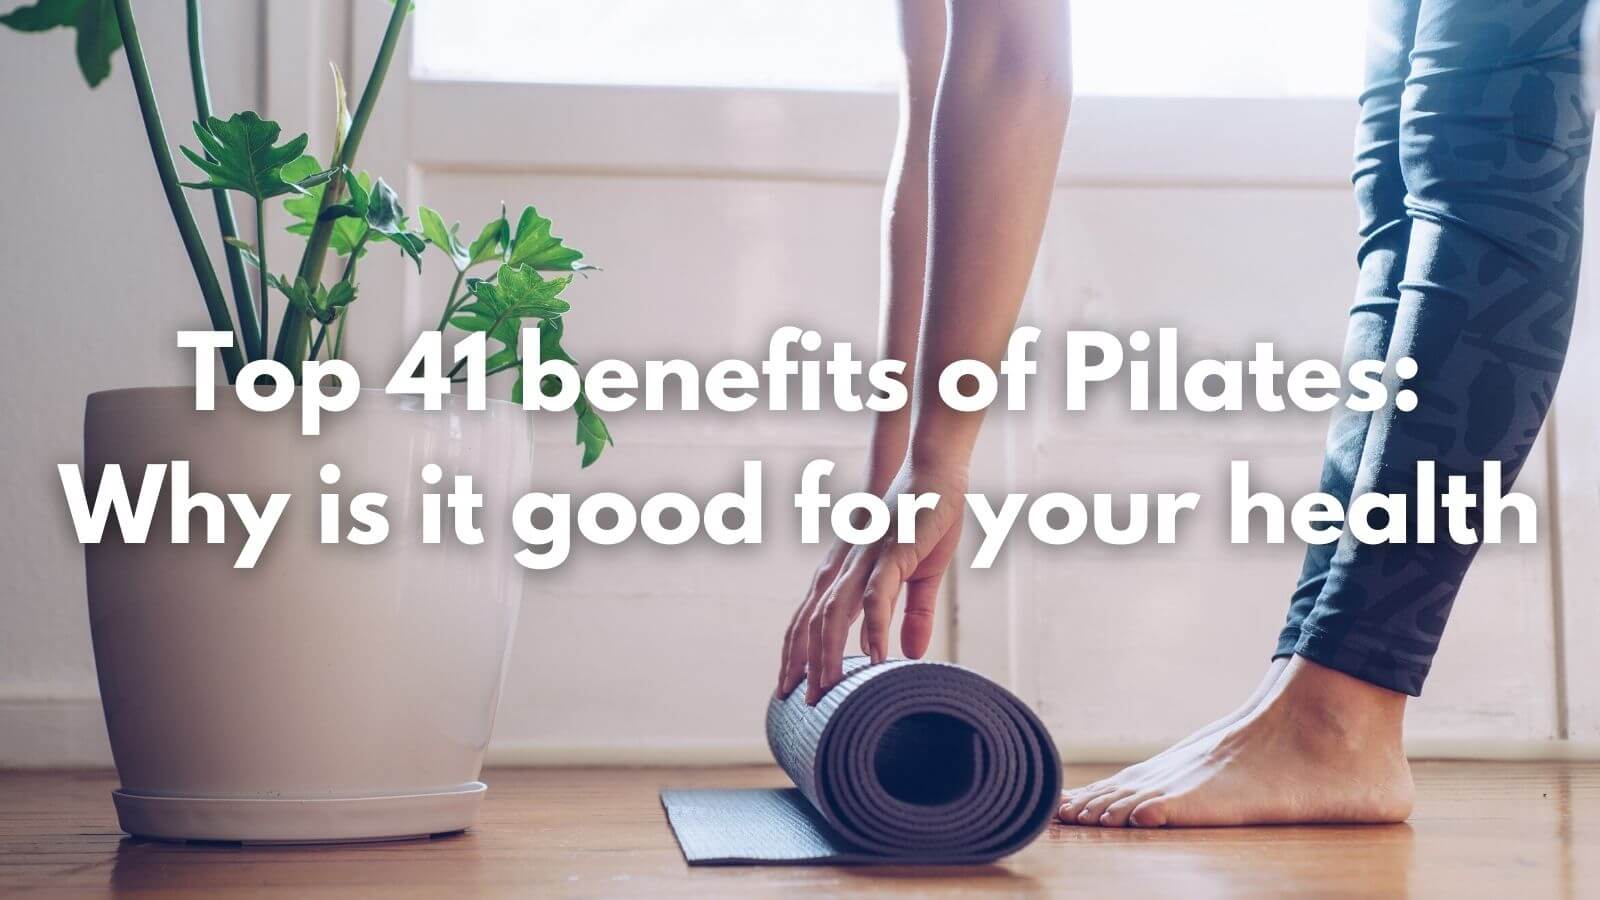 Top 41 Benefits of Pilates: Why It Is Good For Your Health